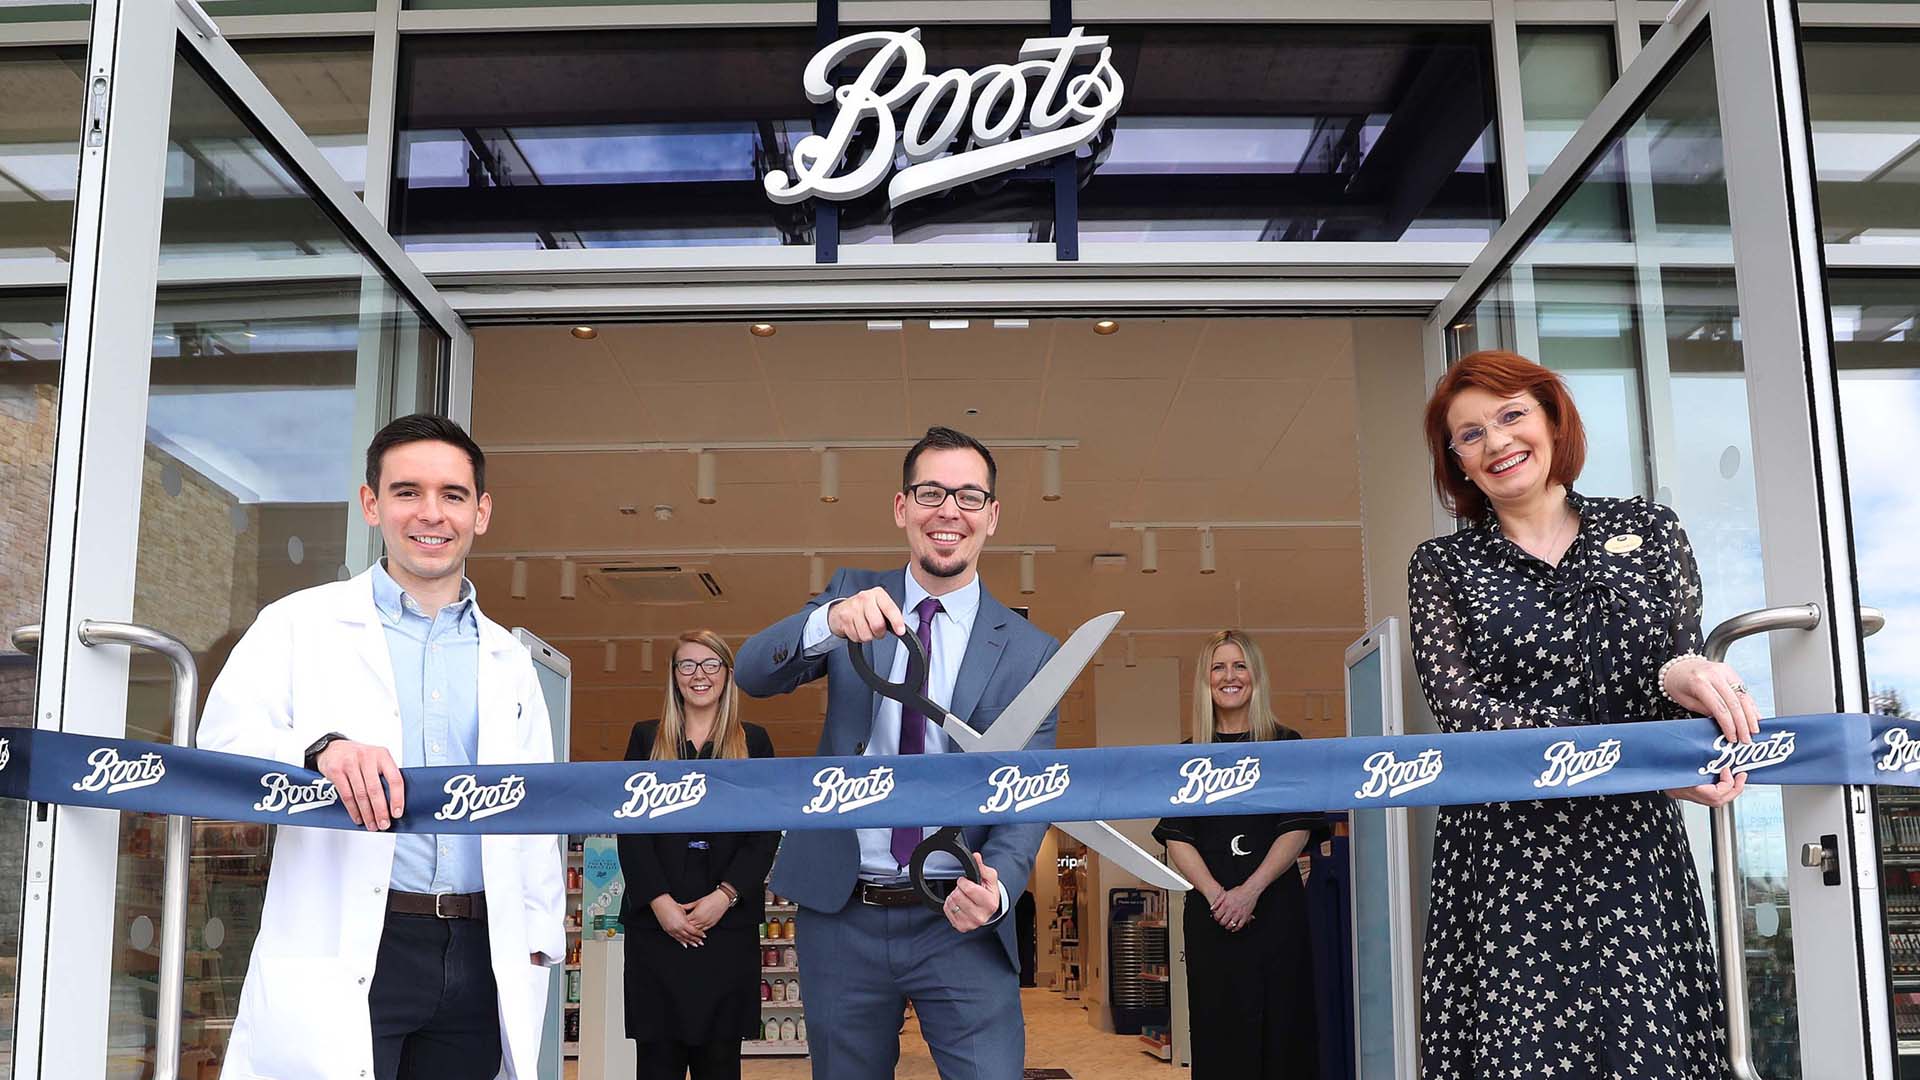 David Boyce, store manager, alongside store team, cutting the store opening tape with giant scissors outside of the Boots store in Knocknacarra, County Galway, Ireland